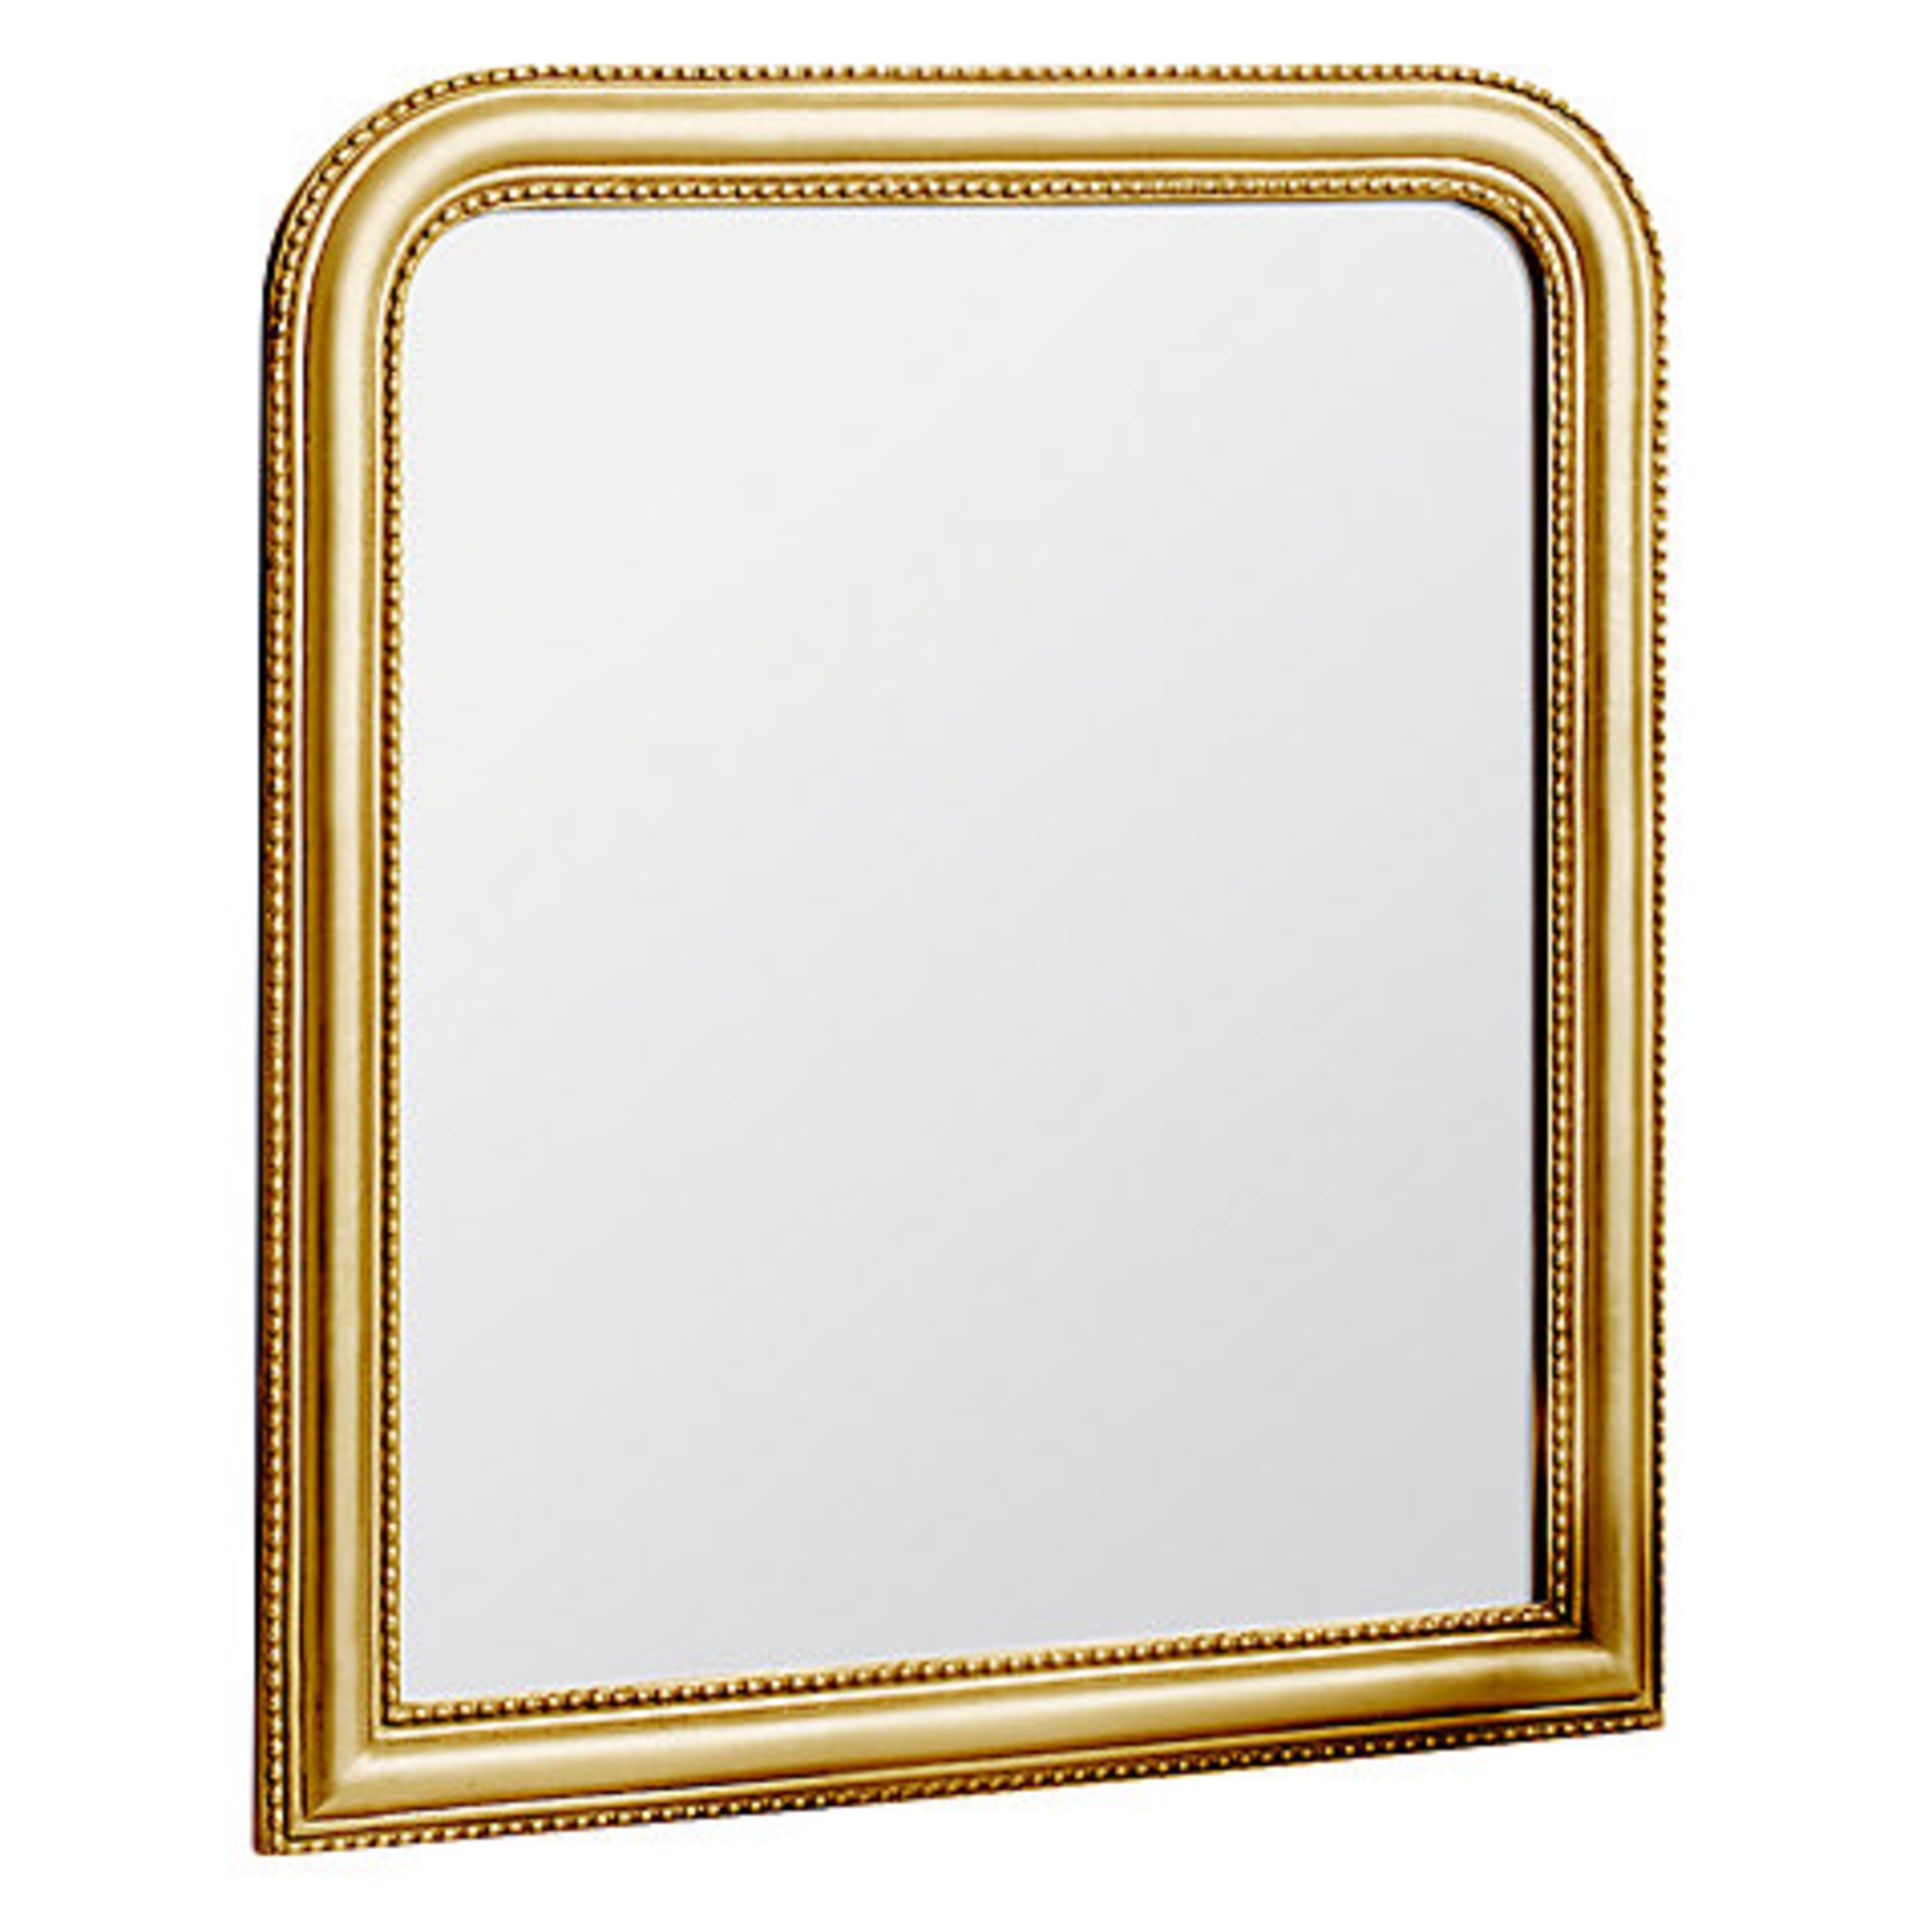 1 x BOXED BEADED OVER MANTLE MIRROR IN GOLD RRP £195 (22.5.17)(4003) *PLEASE NOTE THAT THE BID PRICE